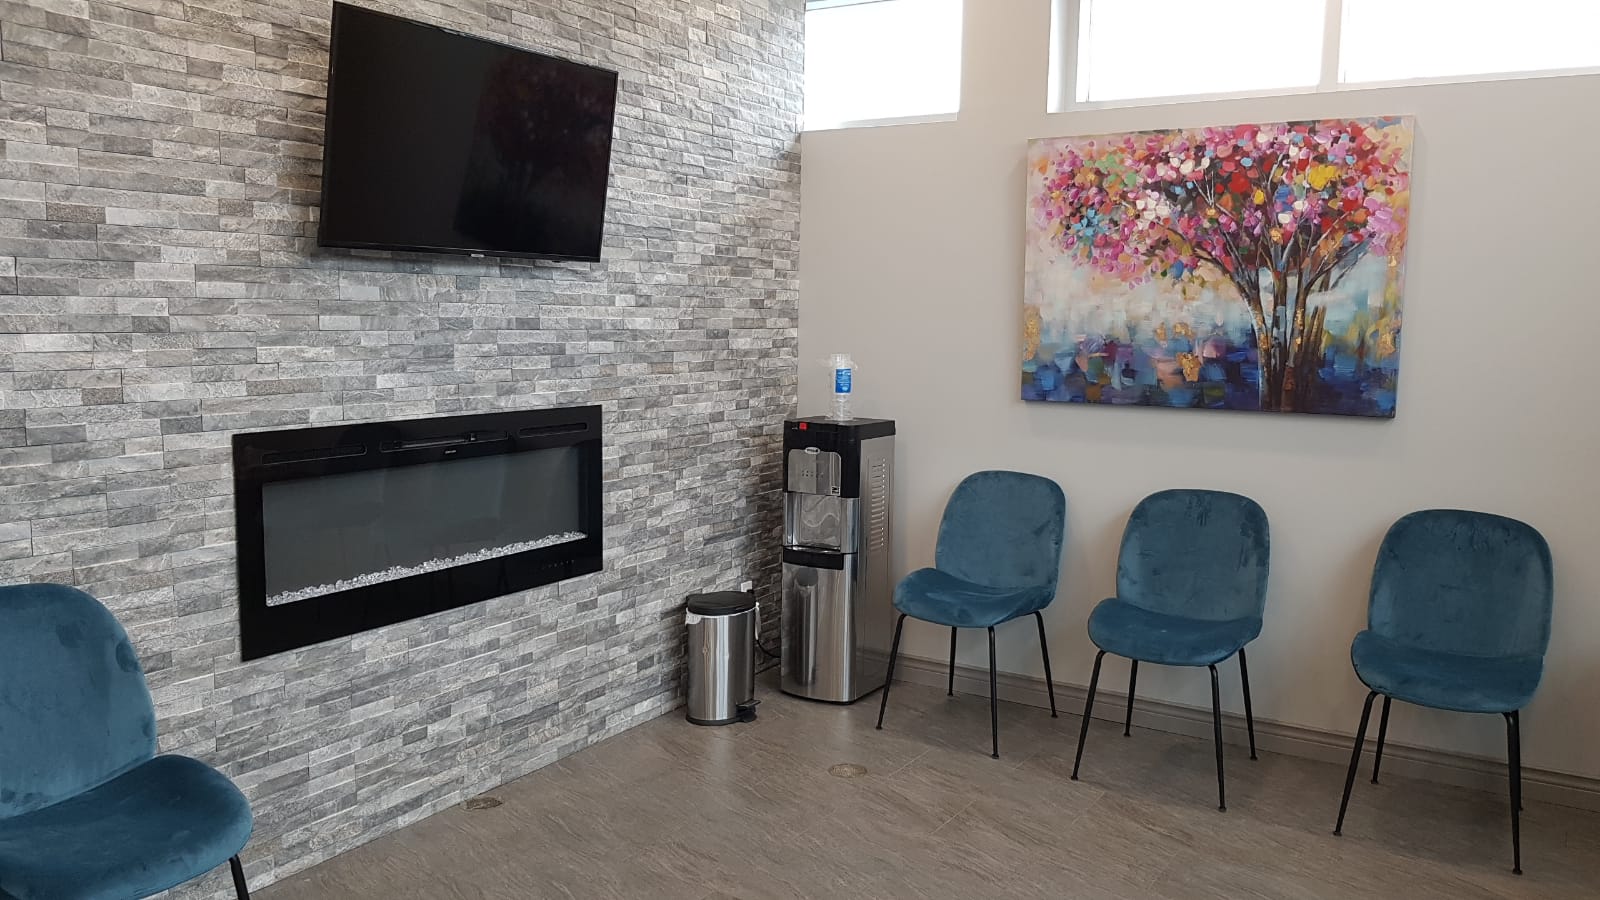 Waiting area with Tv, water dispenser and the chair with painting on the wall